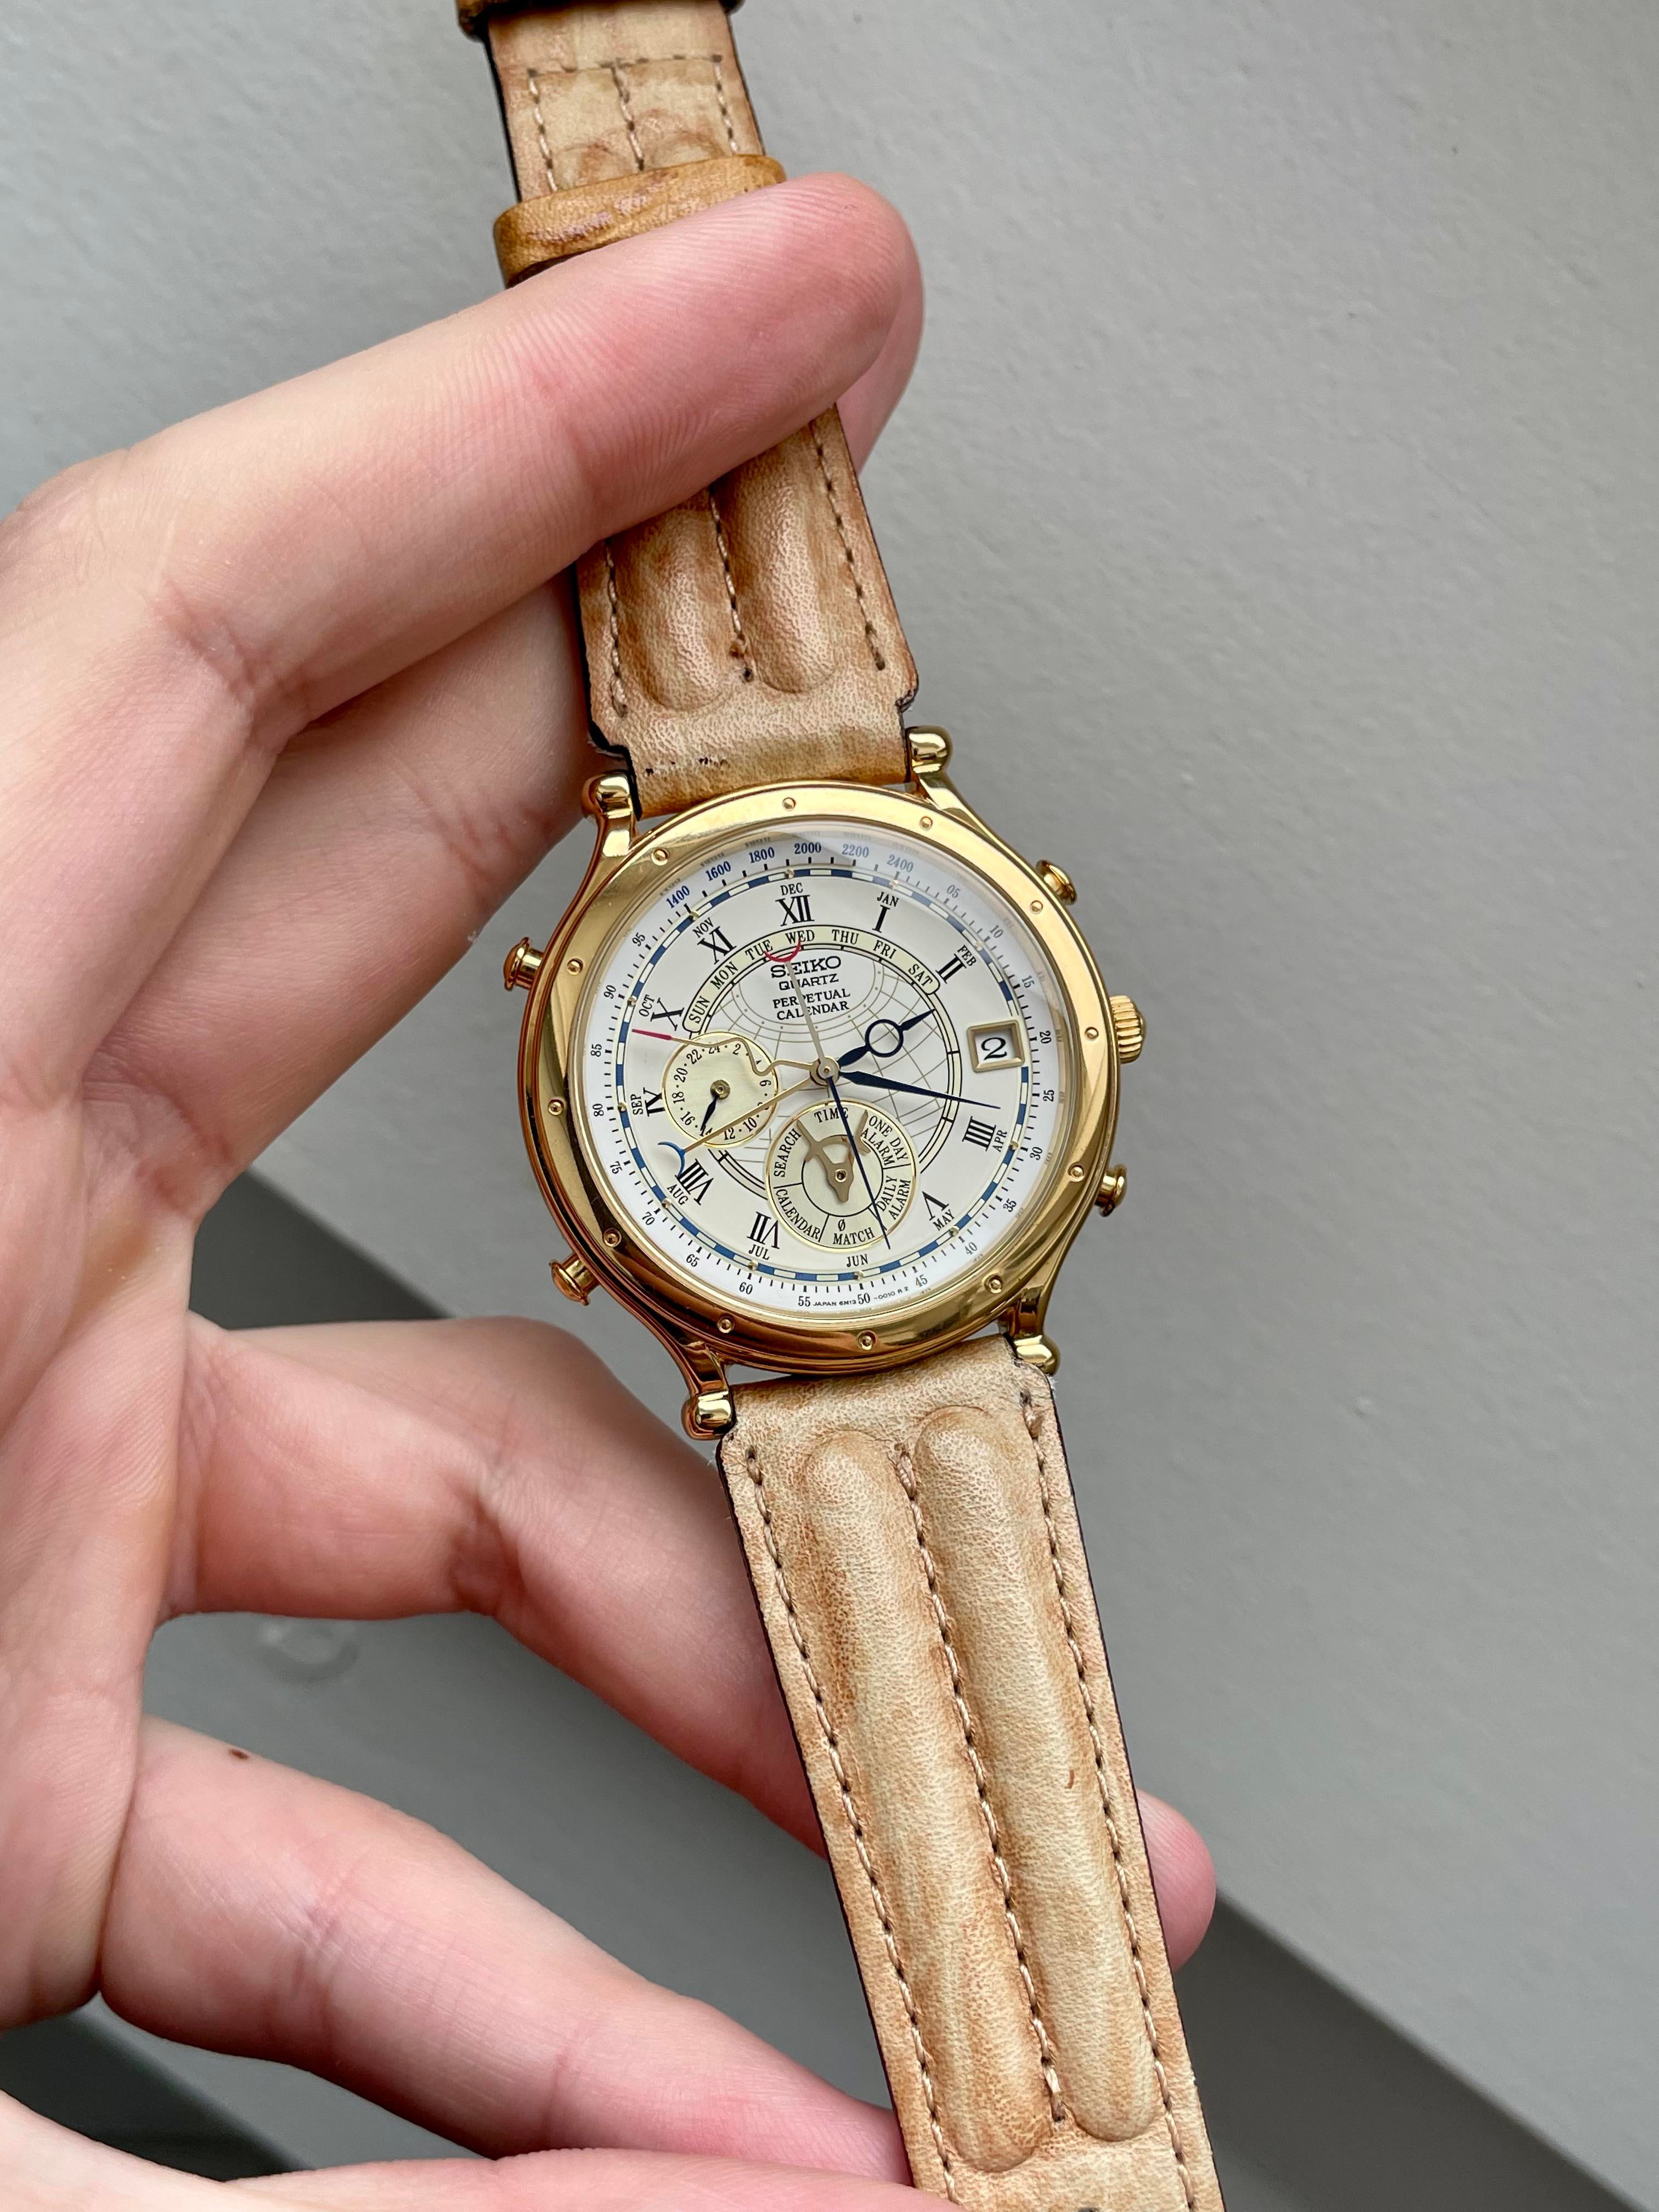 WTS] Seiko Age Discovery Perpetual Calendar Dancing Hands ???? | WatchCharts